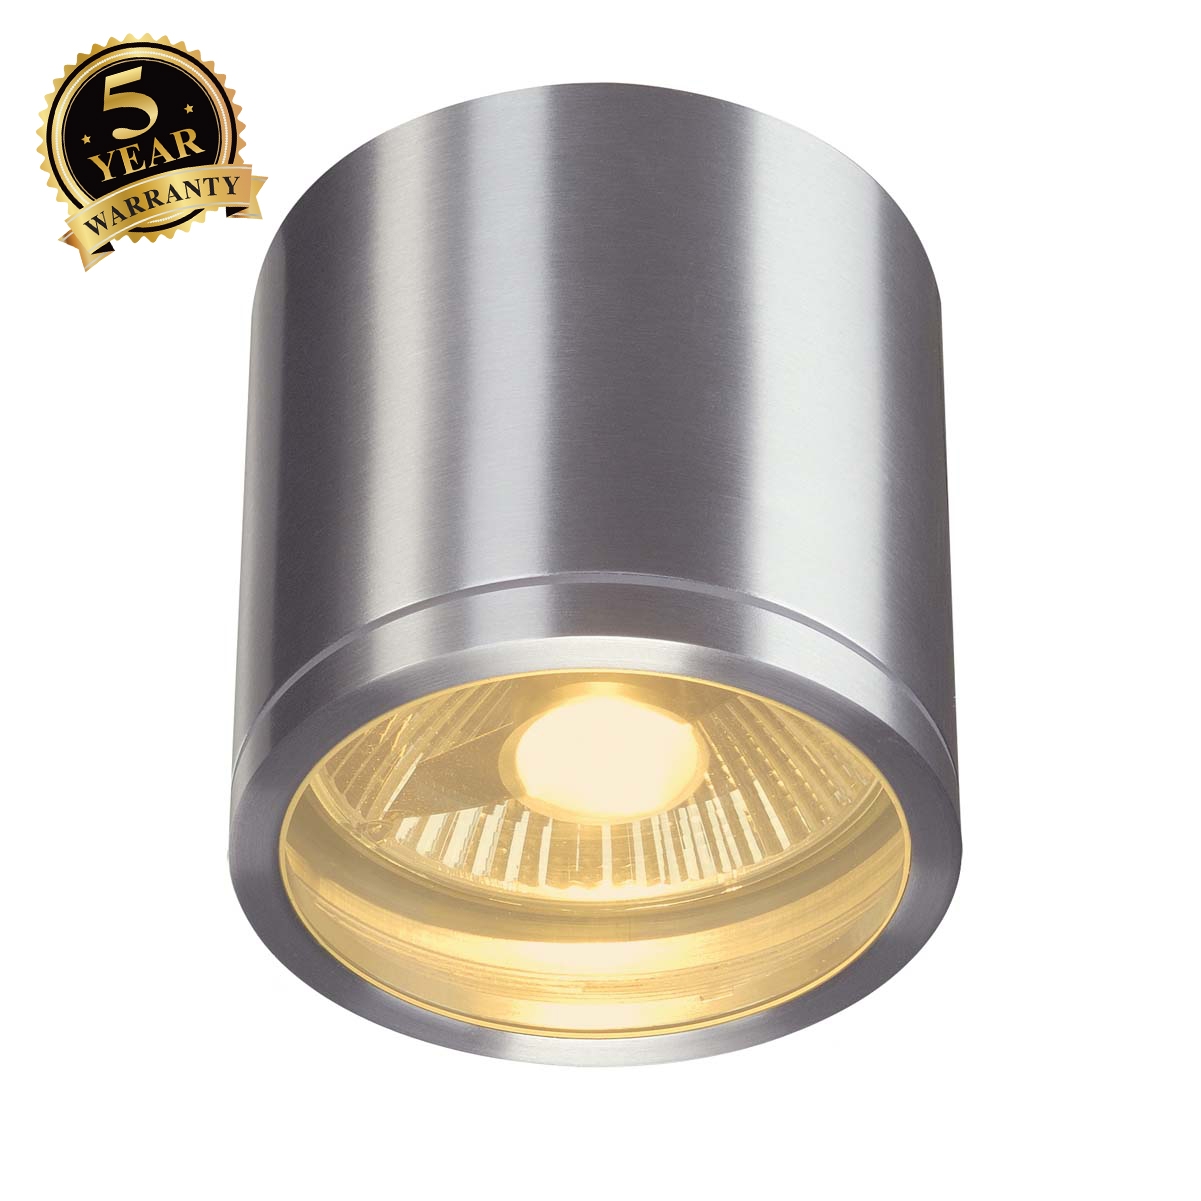 SLV ROX CEILING OUT ceiling light,round, alu brushed, ES111,max. 75W 229756